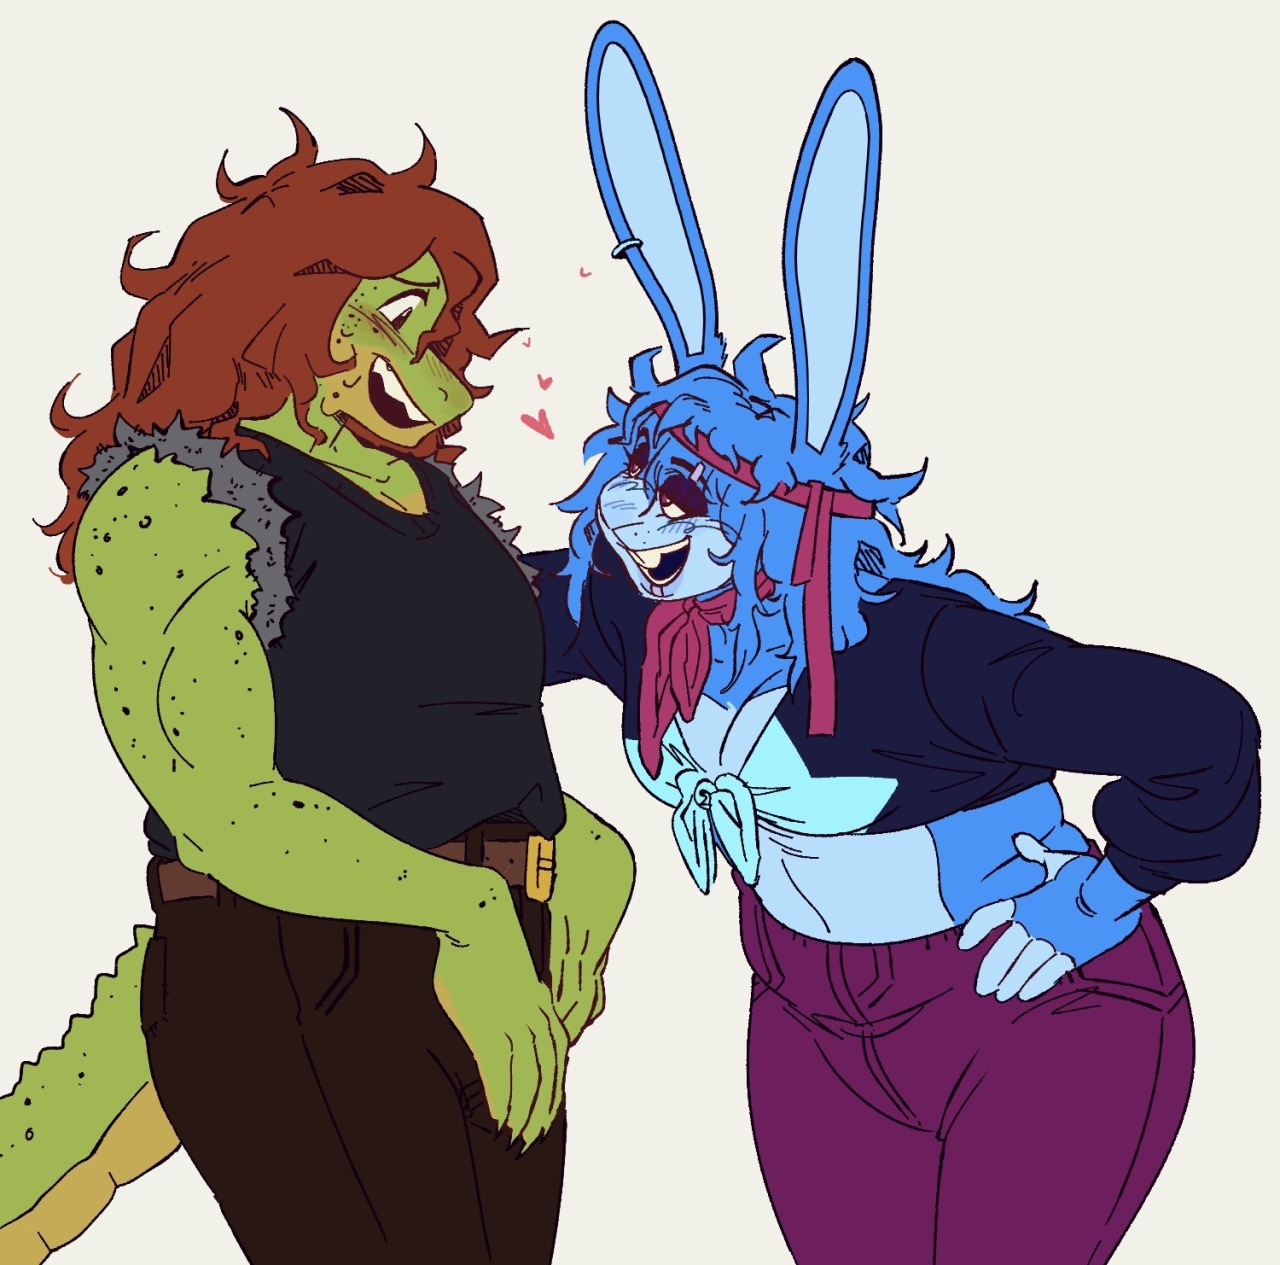 Preview of some Gatorbun art for a recent Ruin AU I'm working on